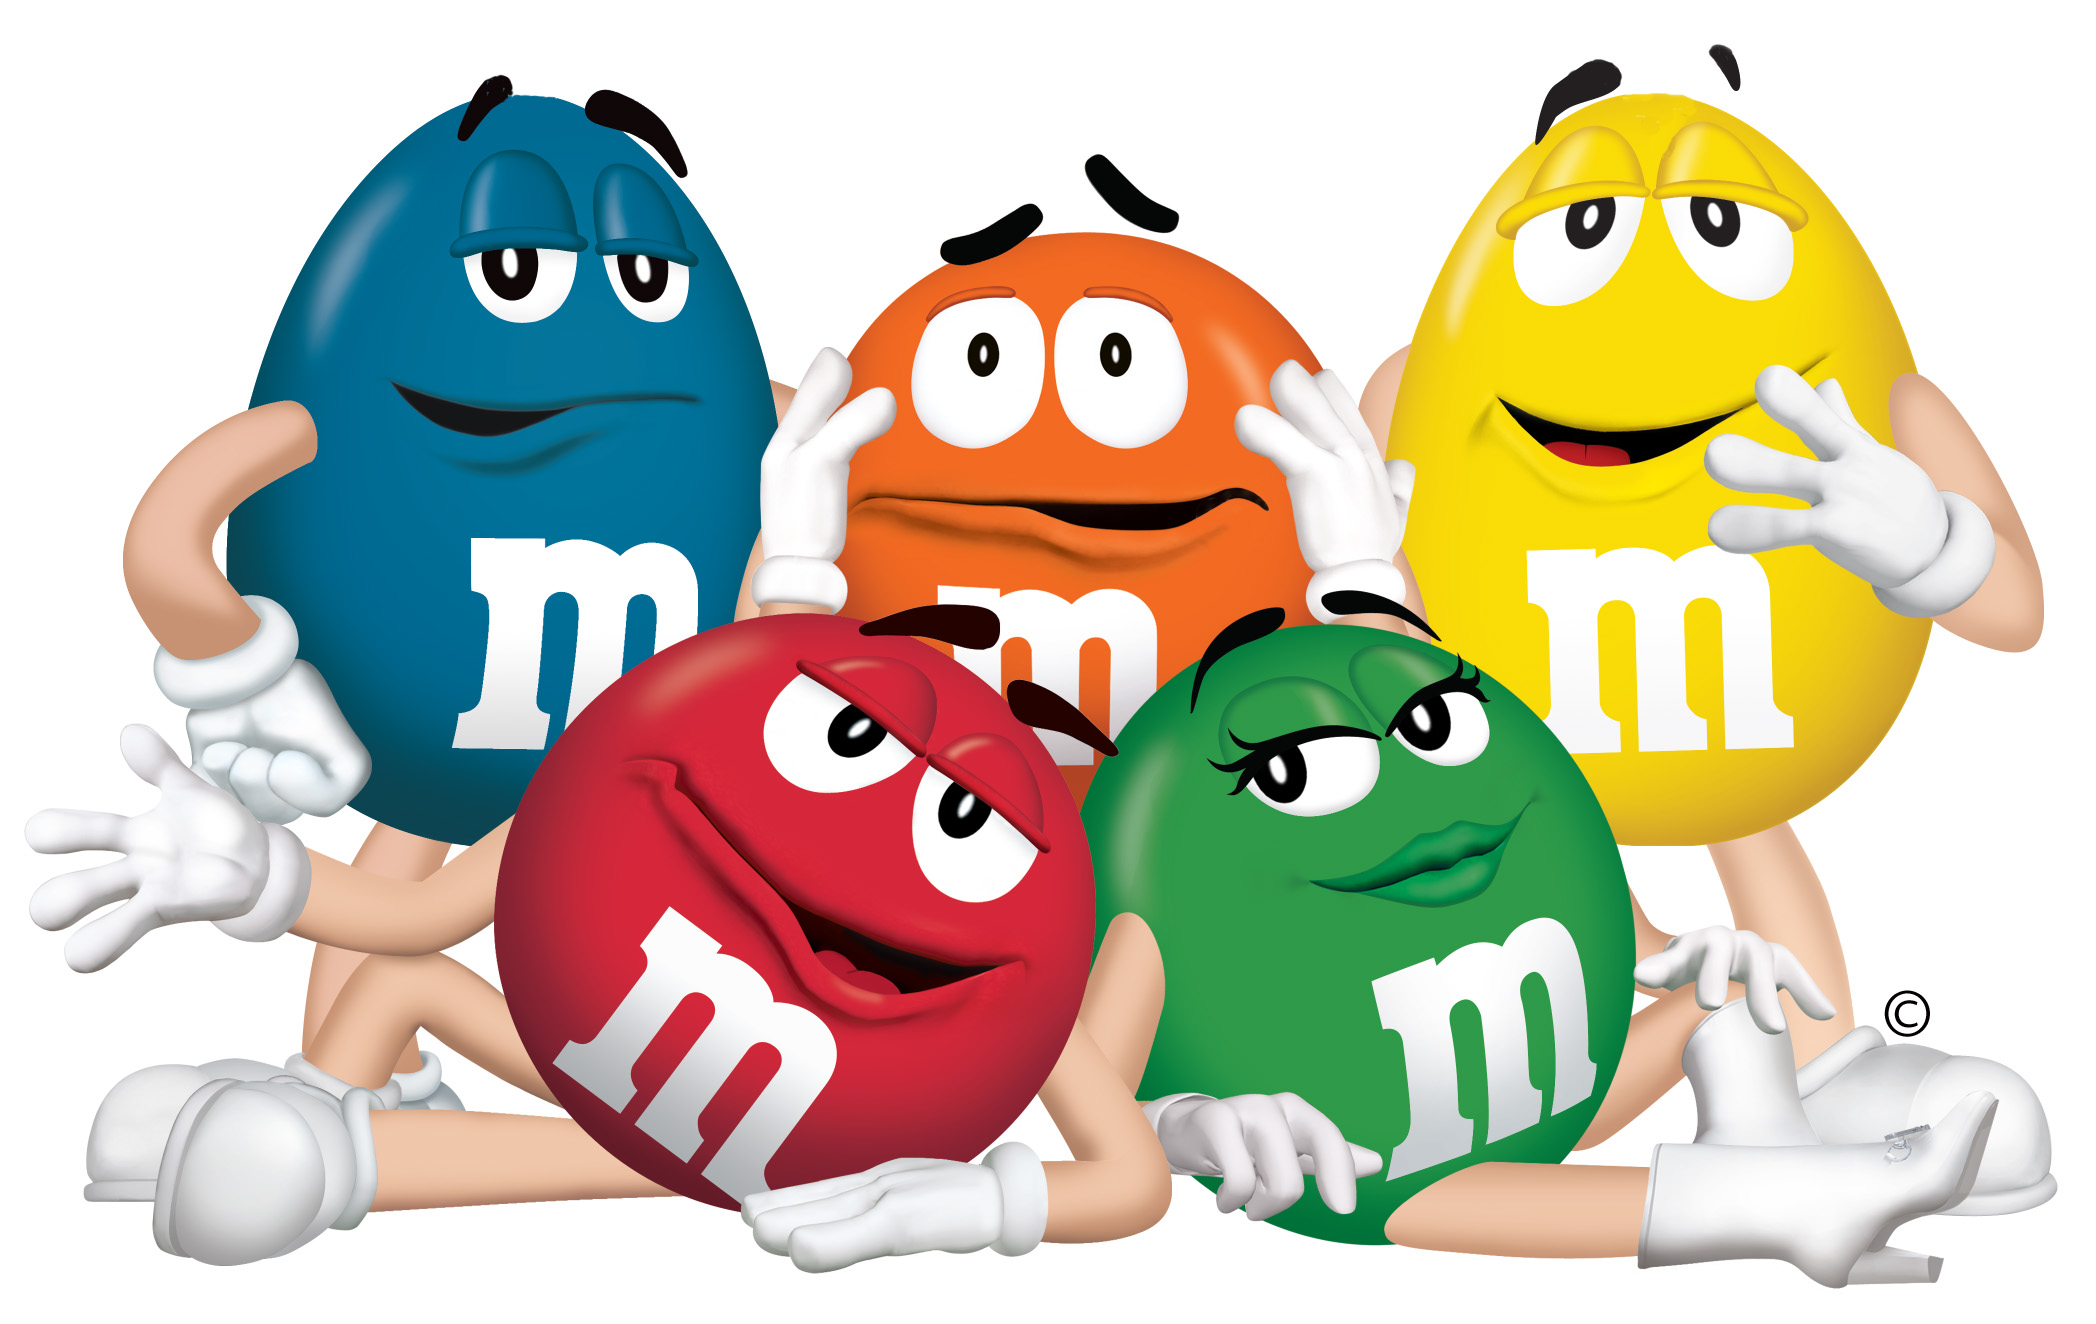 m and m candy logo